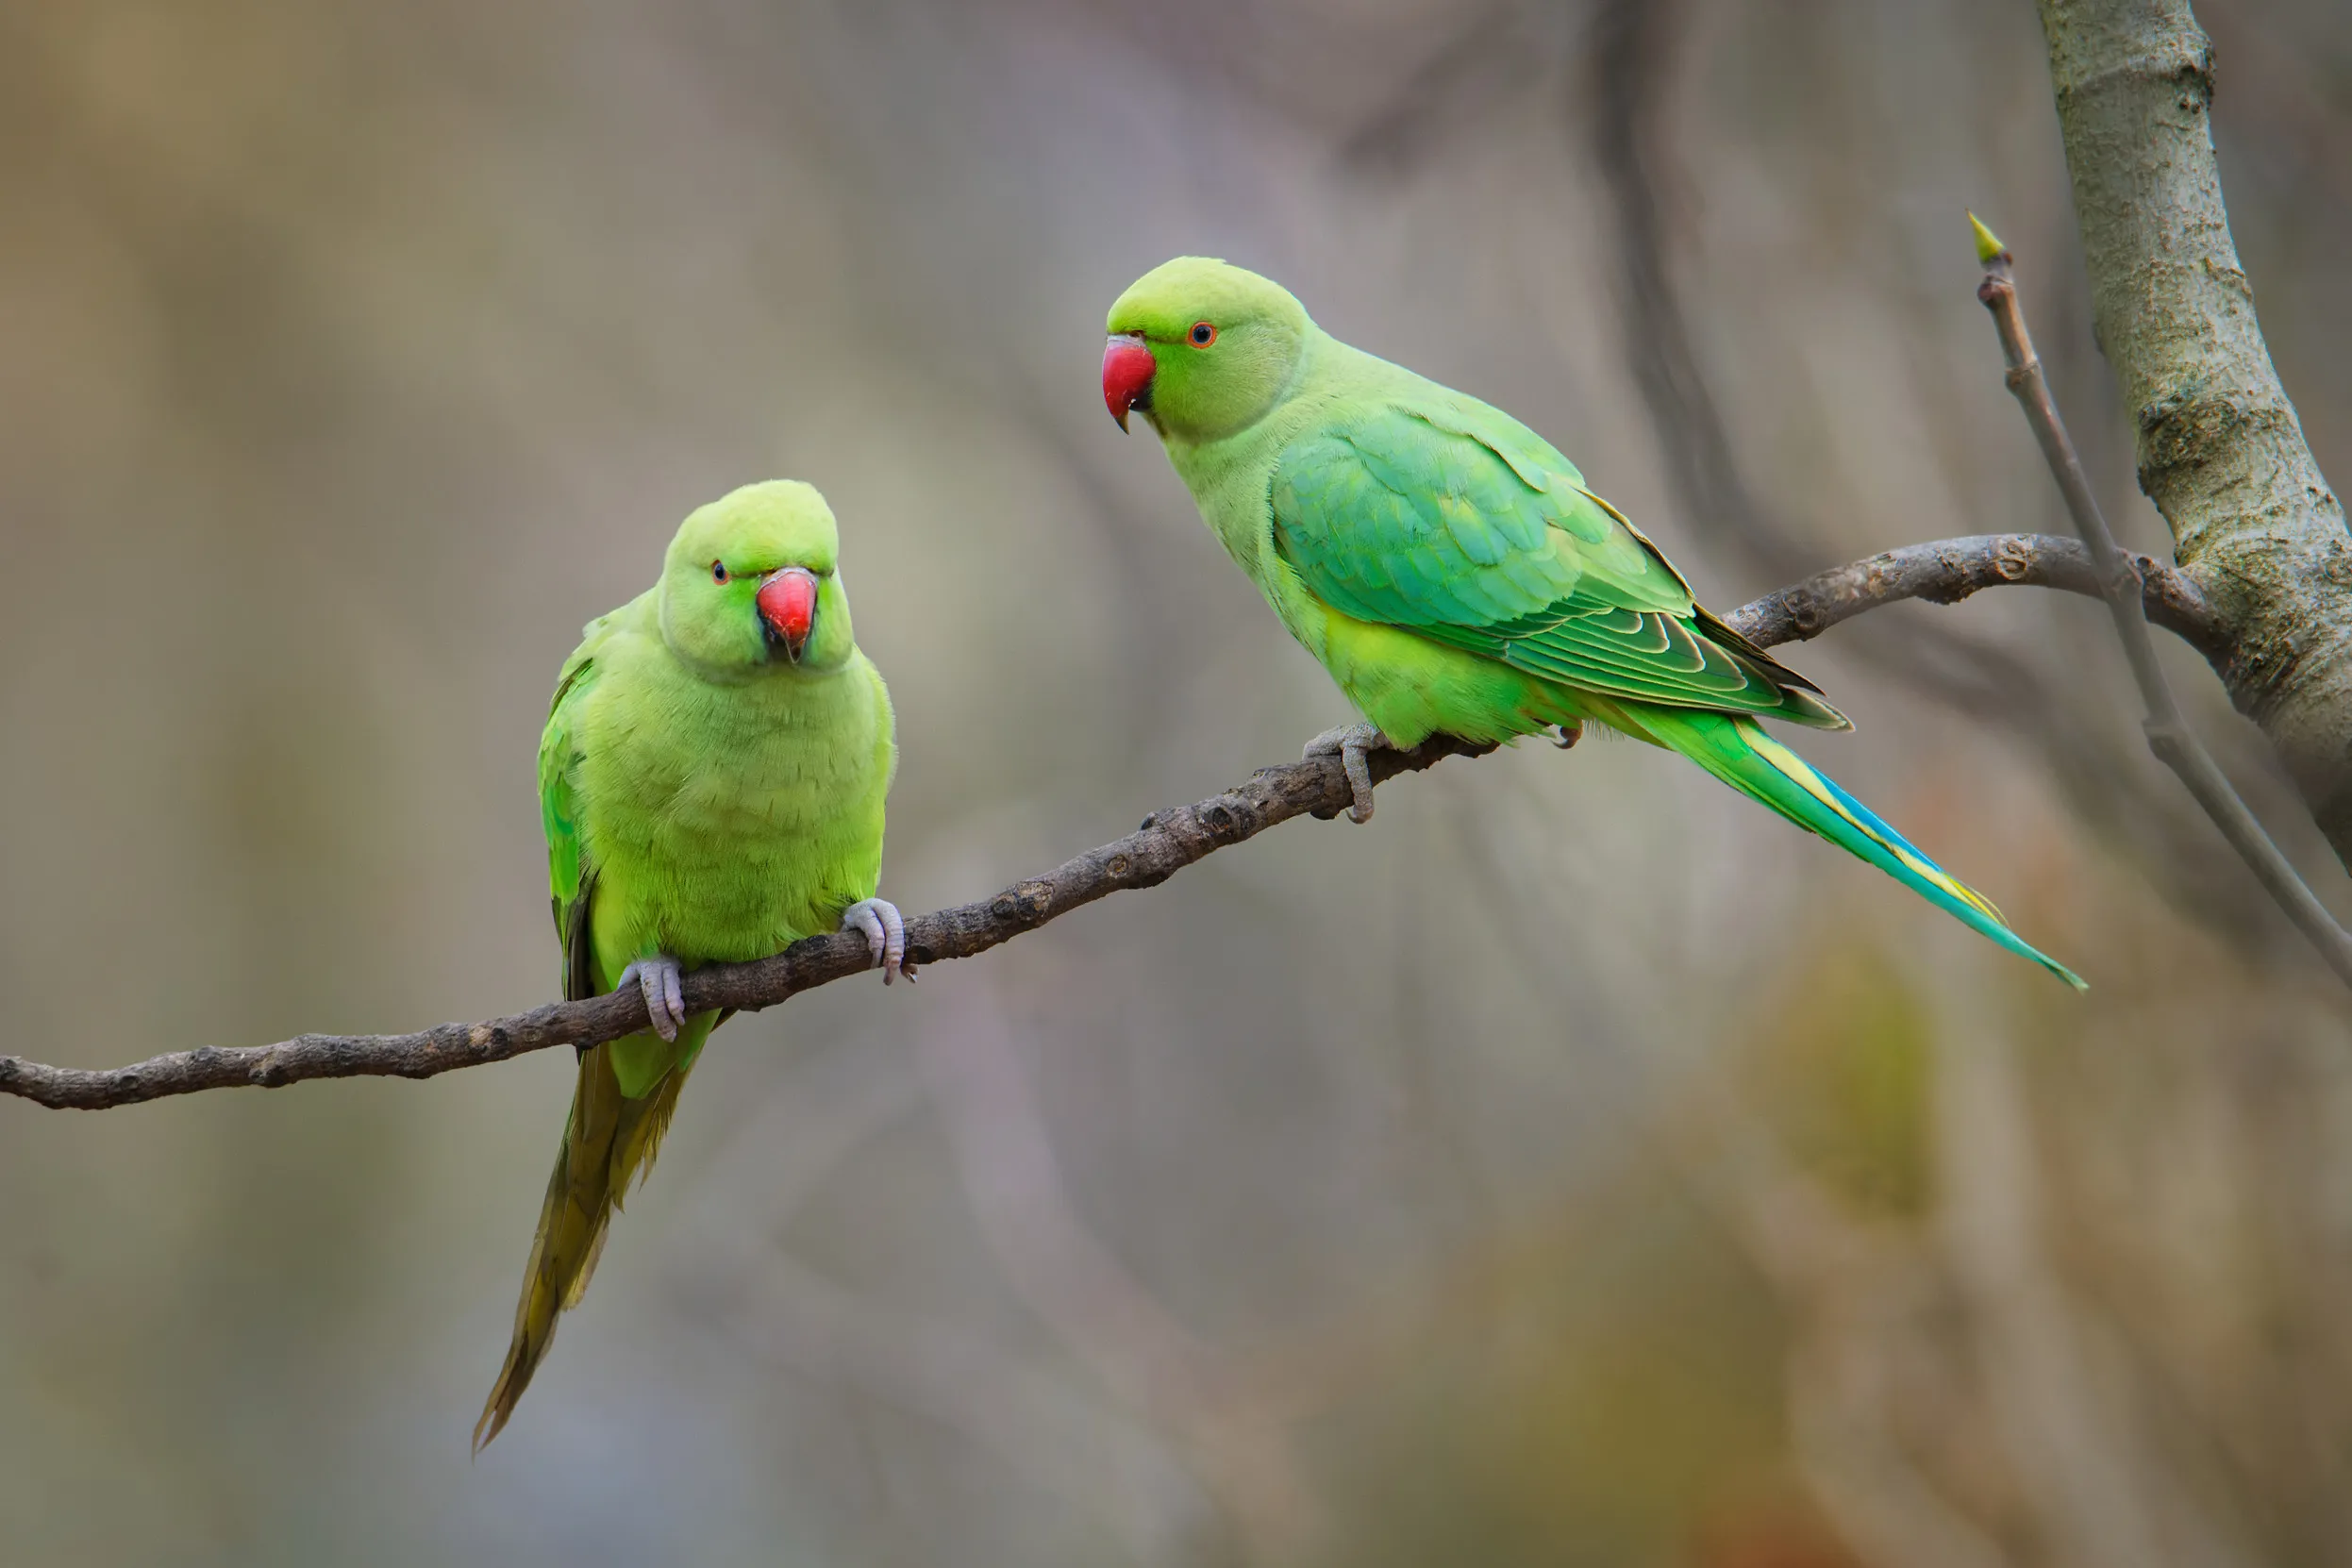 Two Ring-neck Parakeets sat on a tree branch.